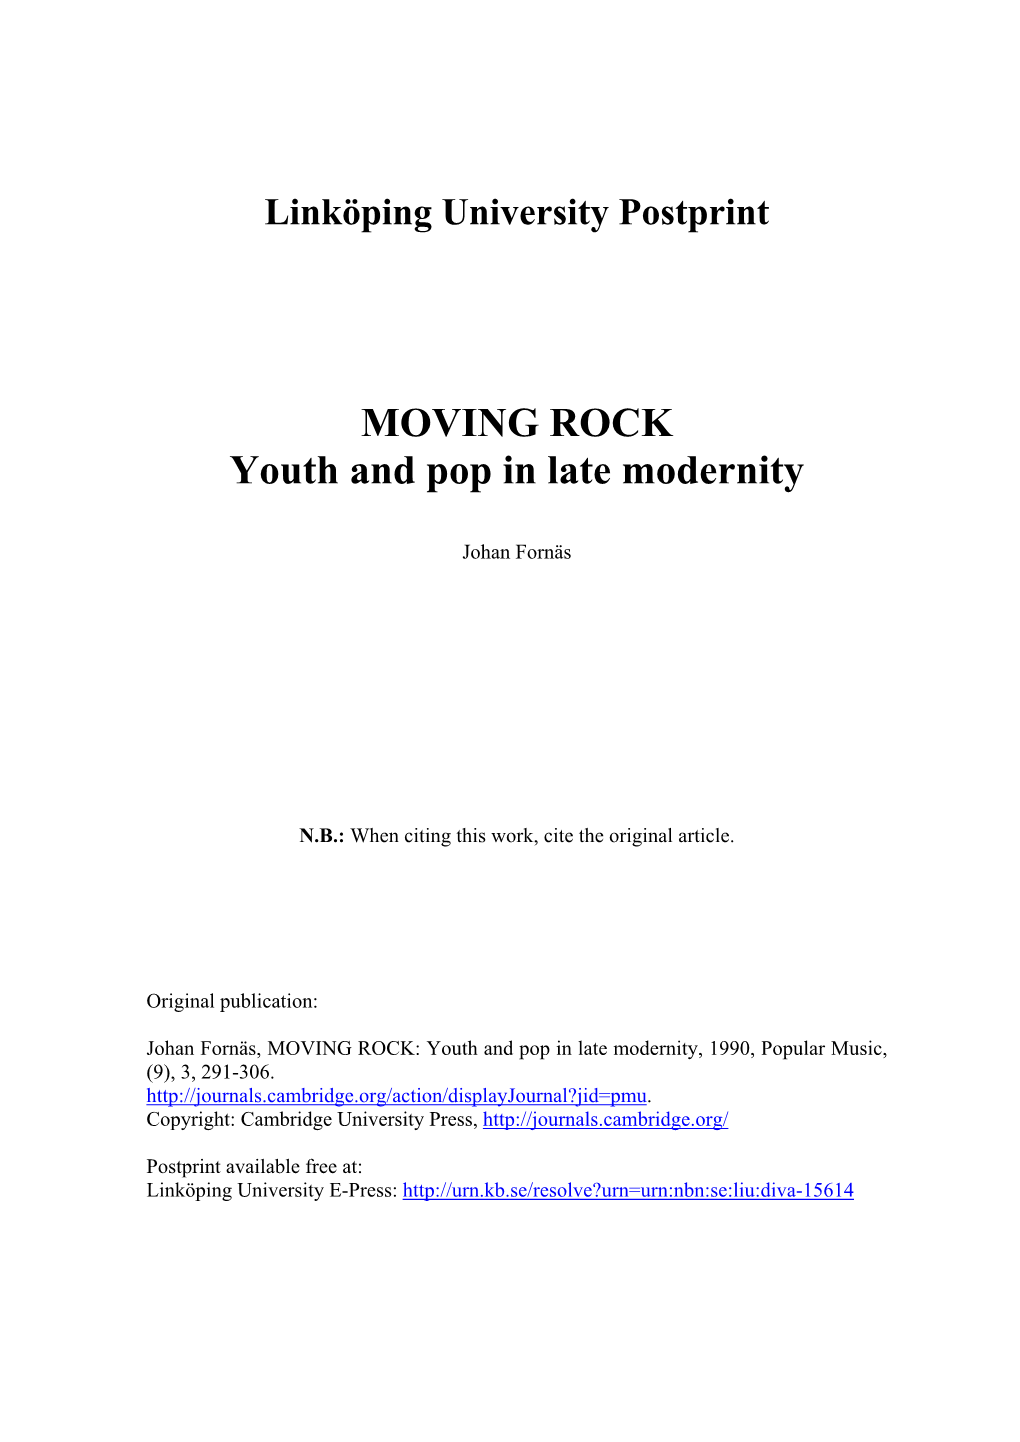 MOVING ROCK Youth and Pop in Late Modernity